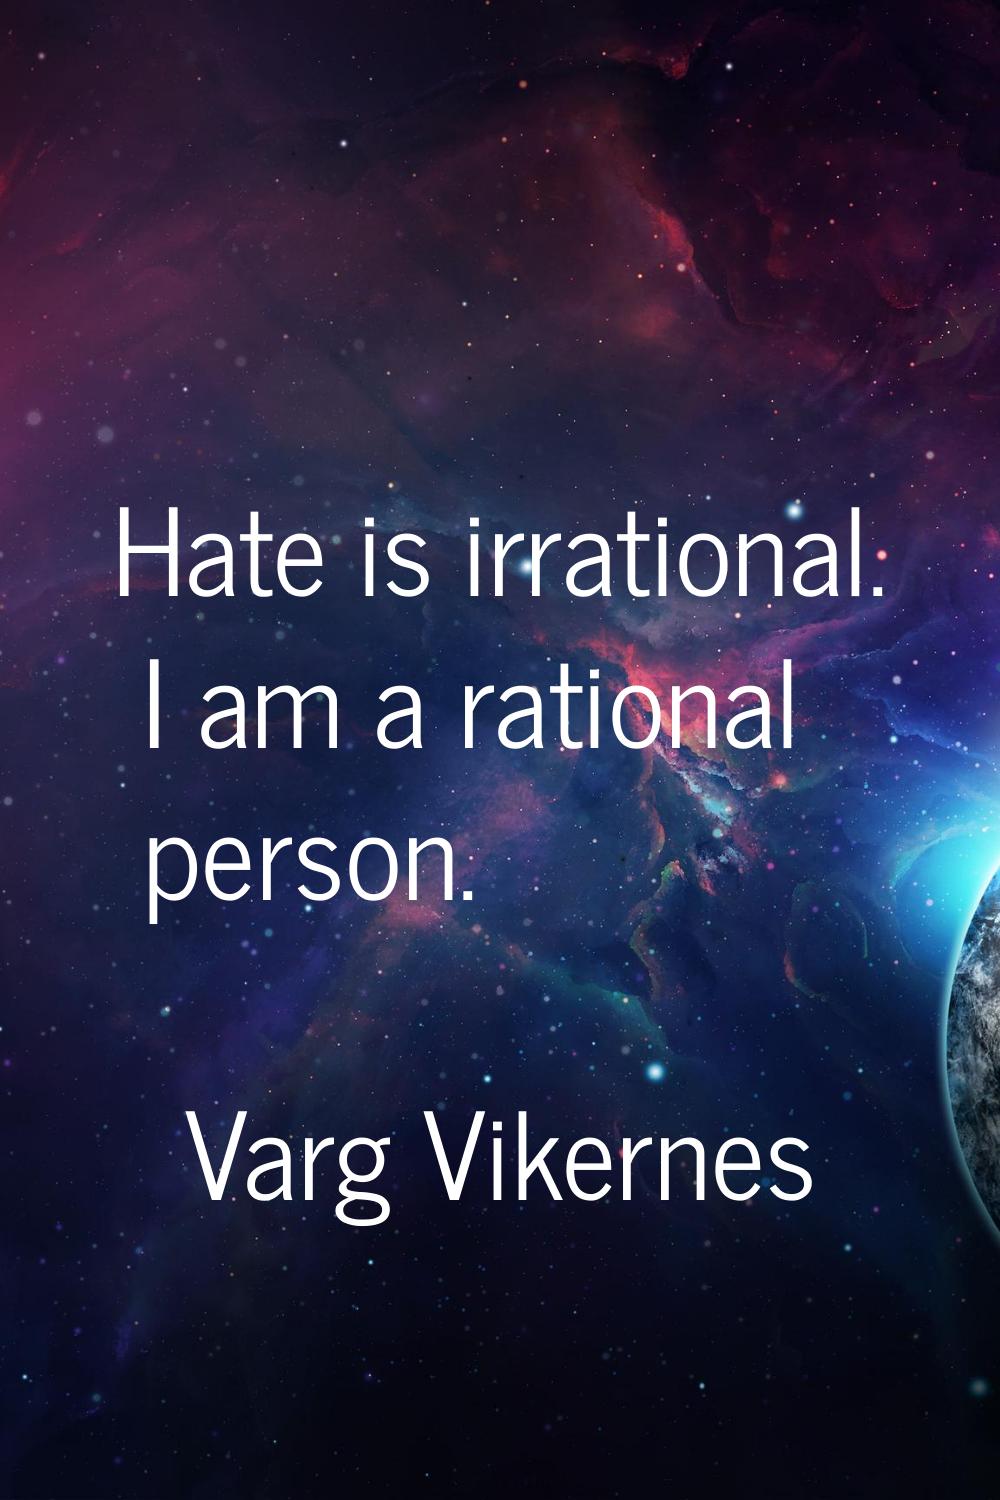 Hate is irrational. I am a rational person.